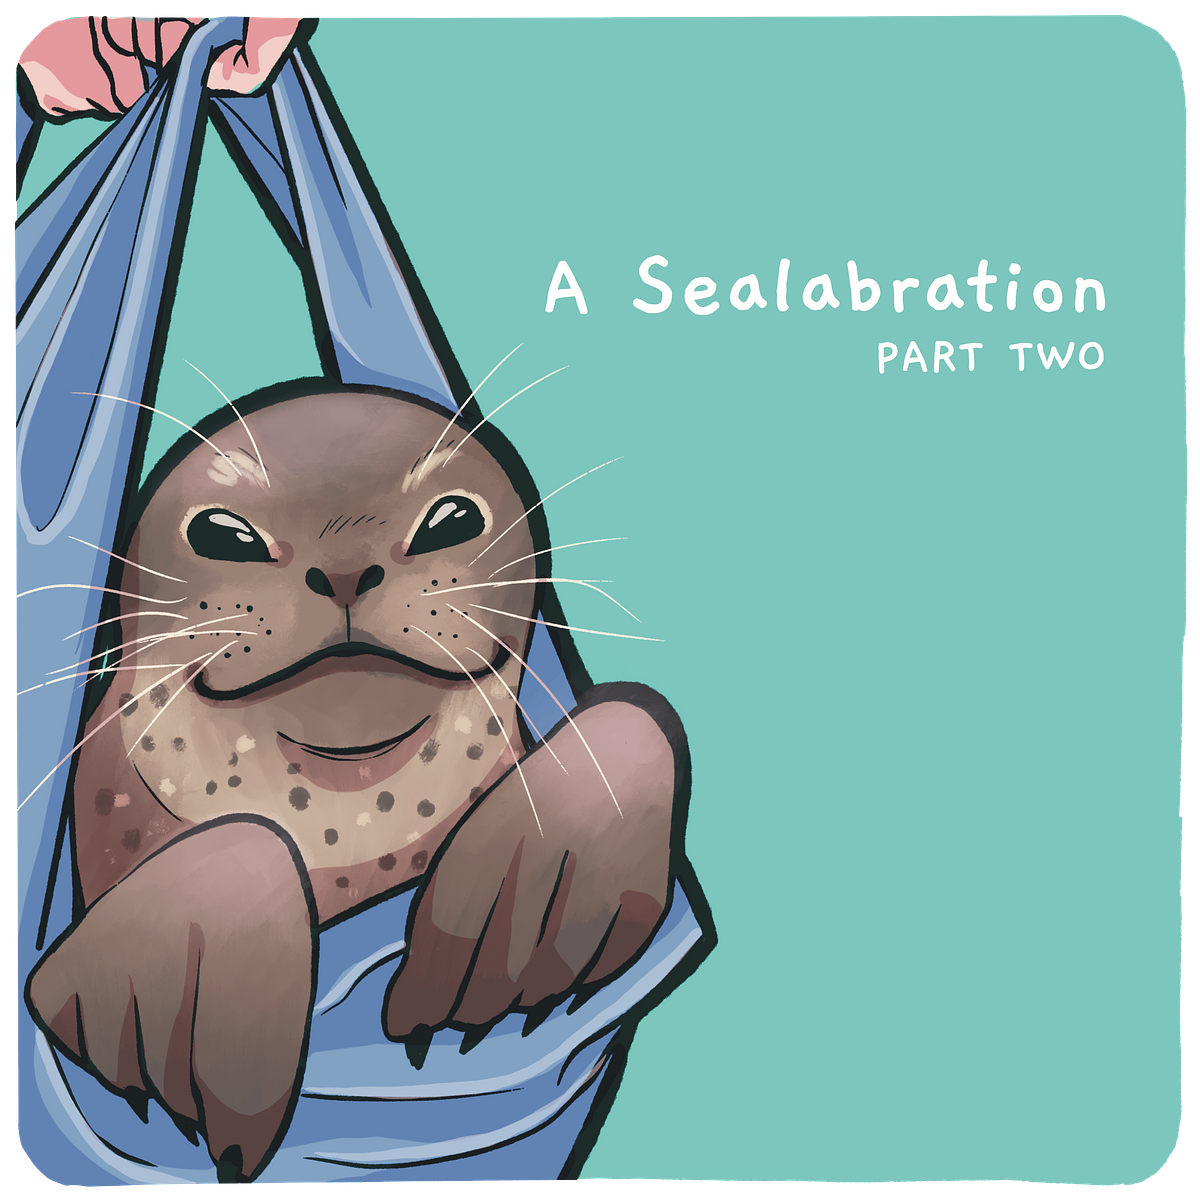 comic illustration of seal swaddled in blankets with text that says 'A Sealabration: Part Two'